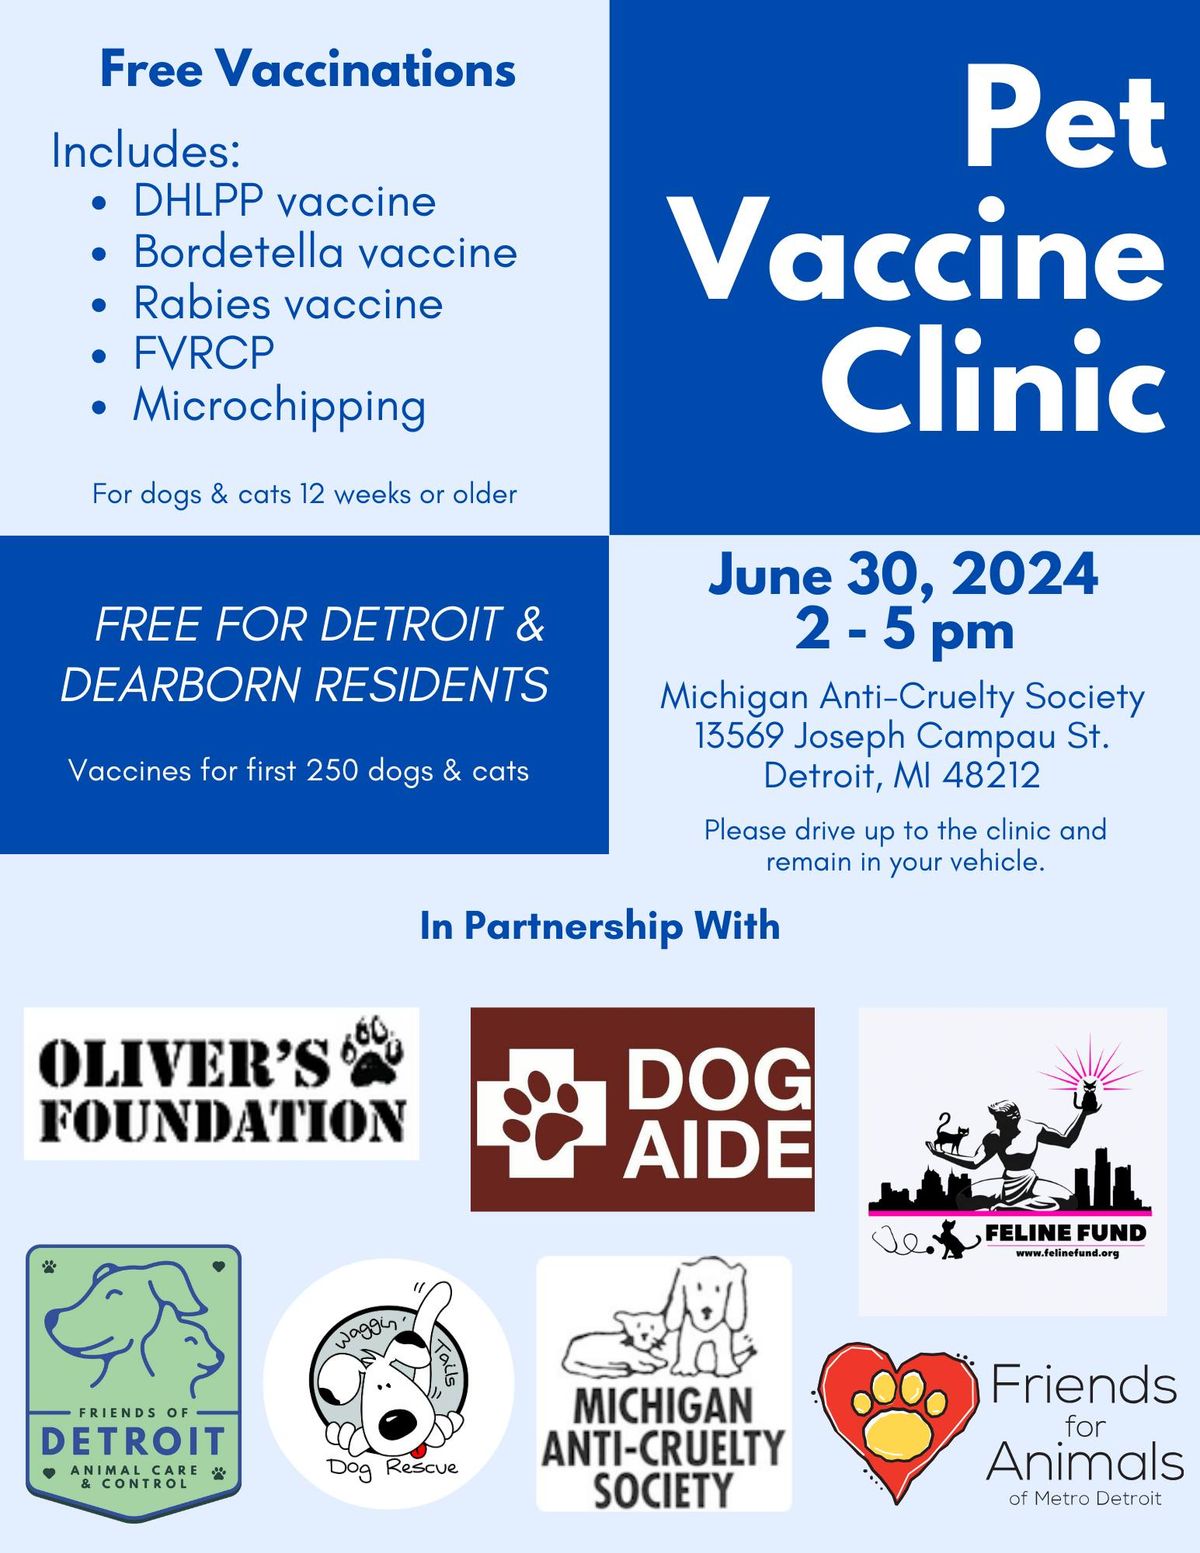 Pet Vaccine Clinic - CANCELLED